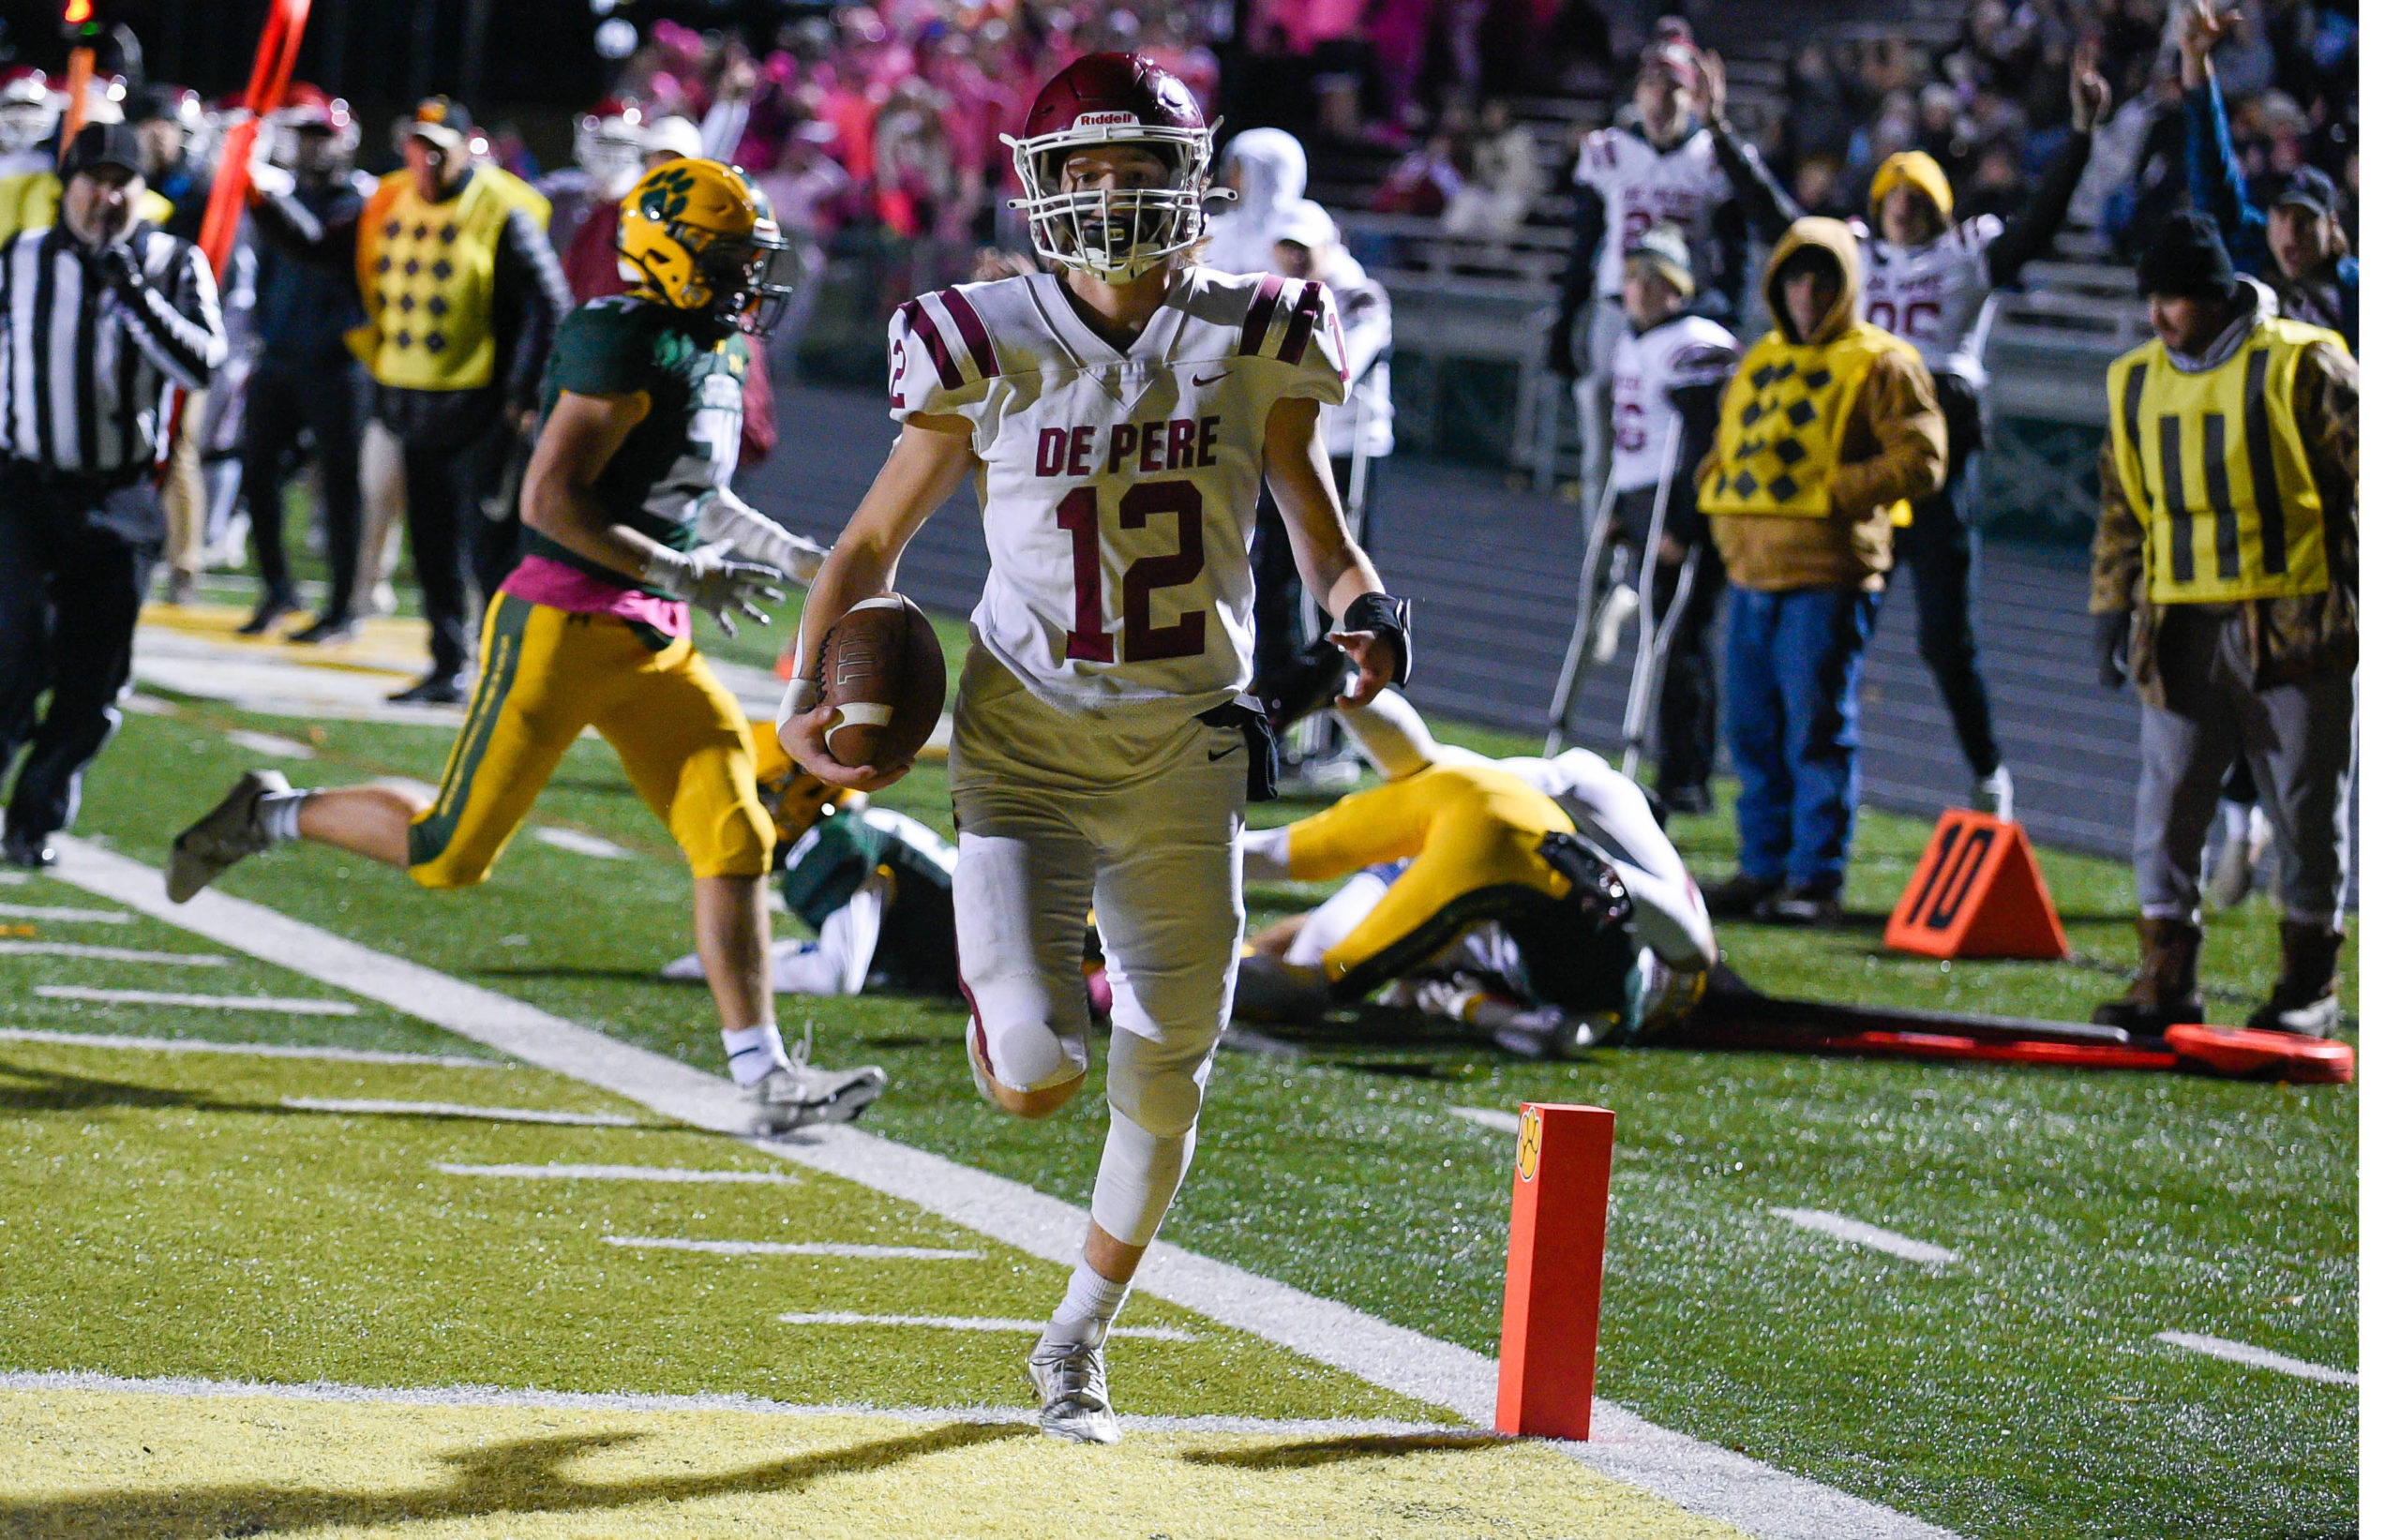 De Pere punches ticket to playoffs; Ashwaubenon still has a shot to get in